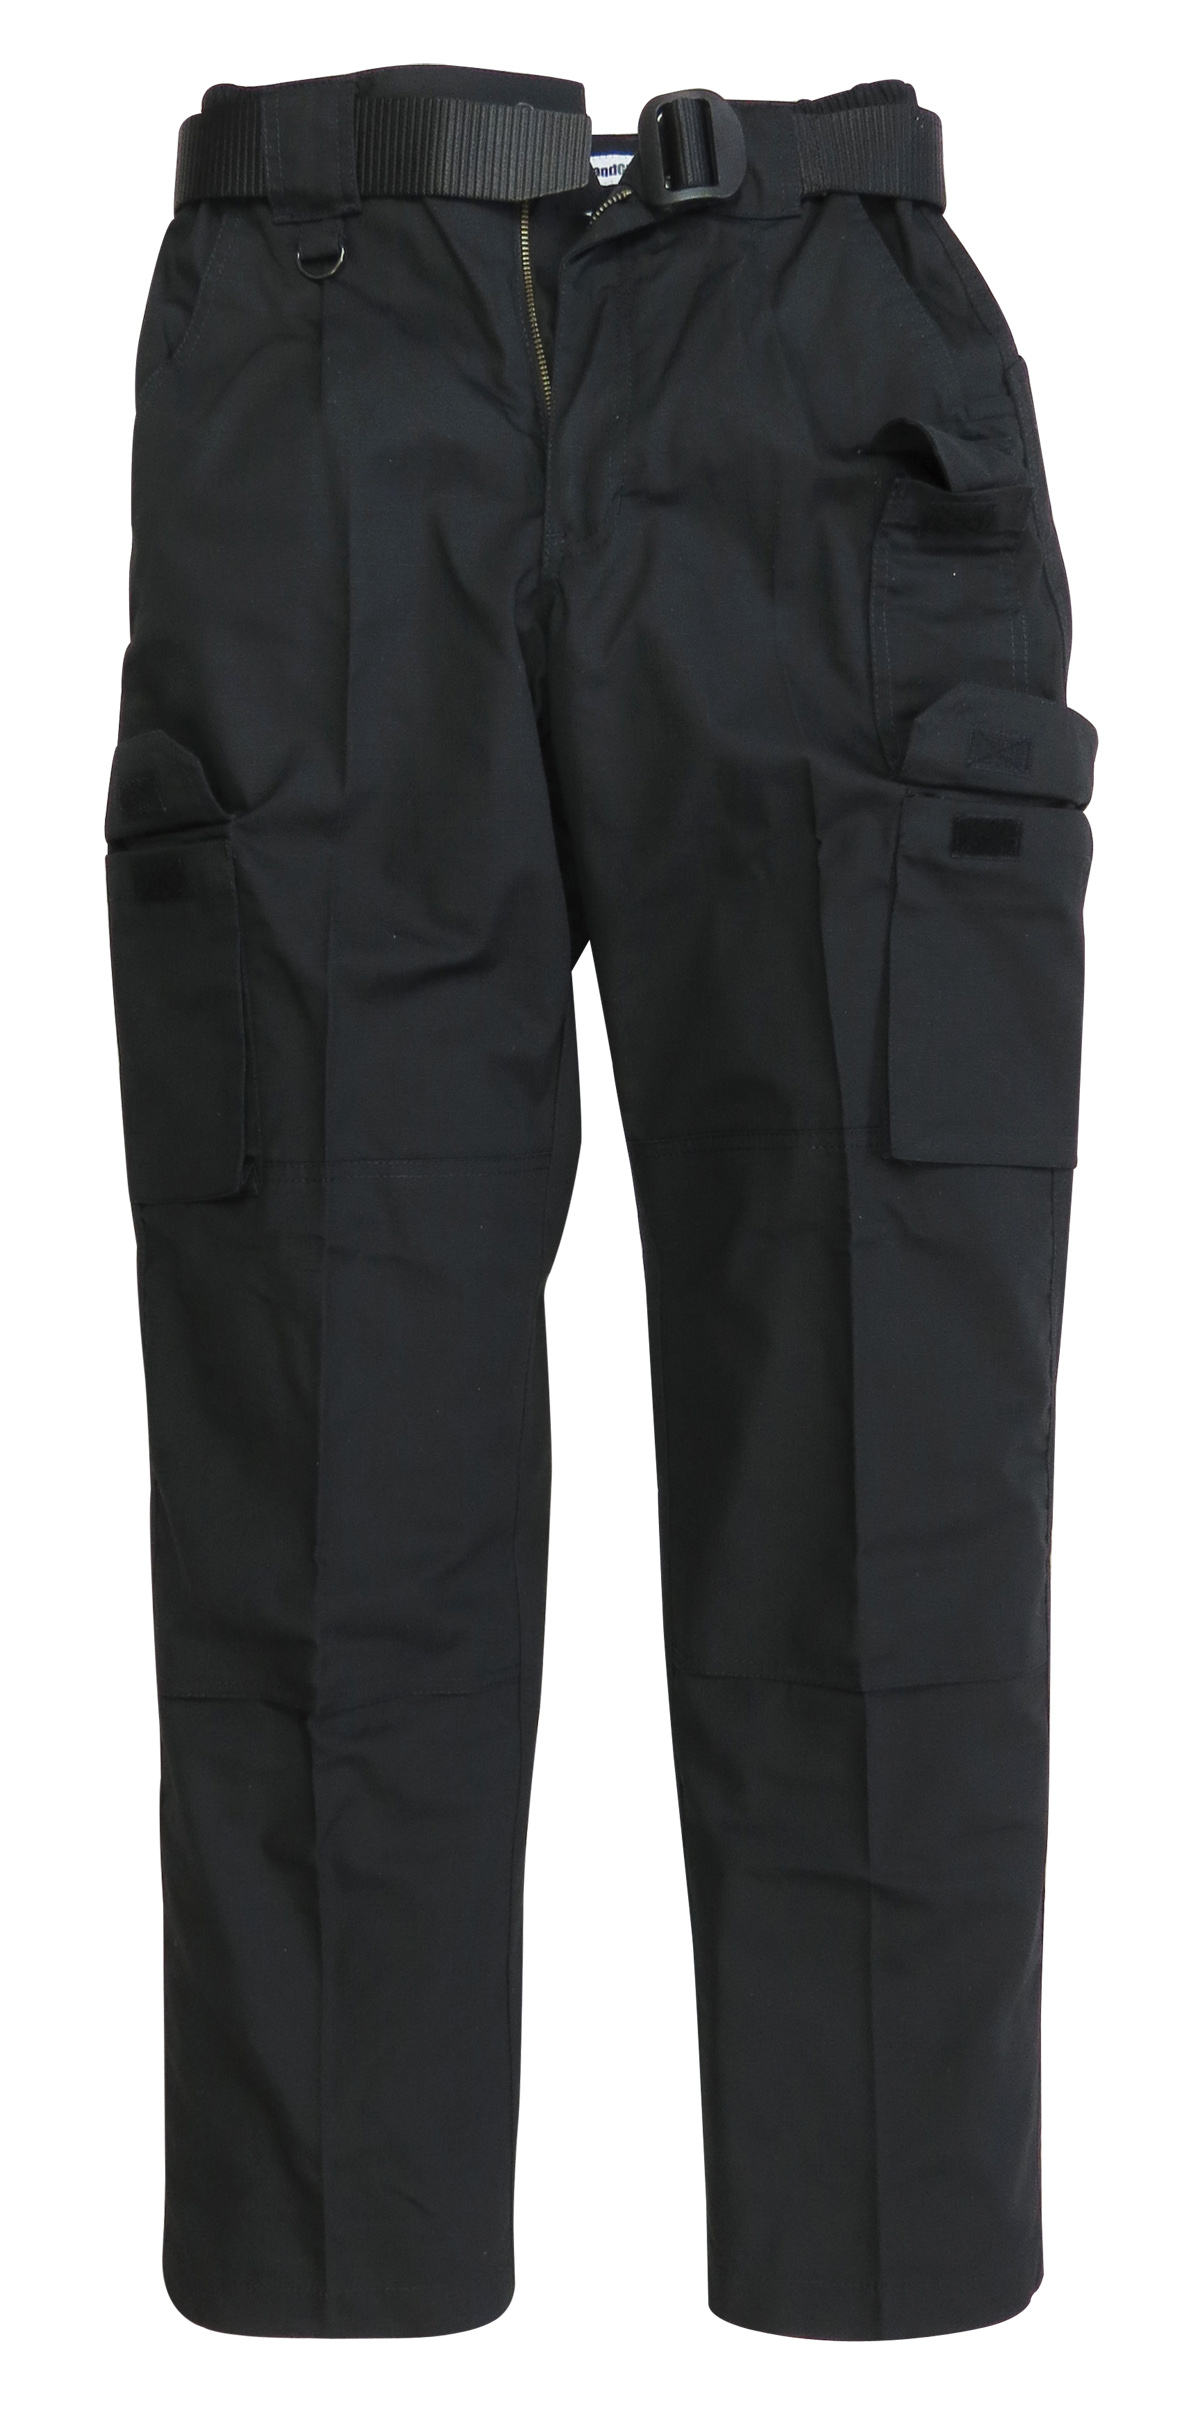 TRGPSG Men's Tactical Pants Military Combat Outdoor Work Trousers with